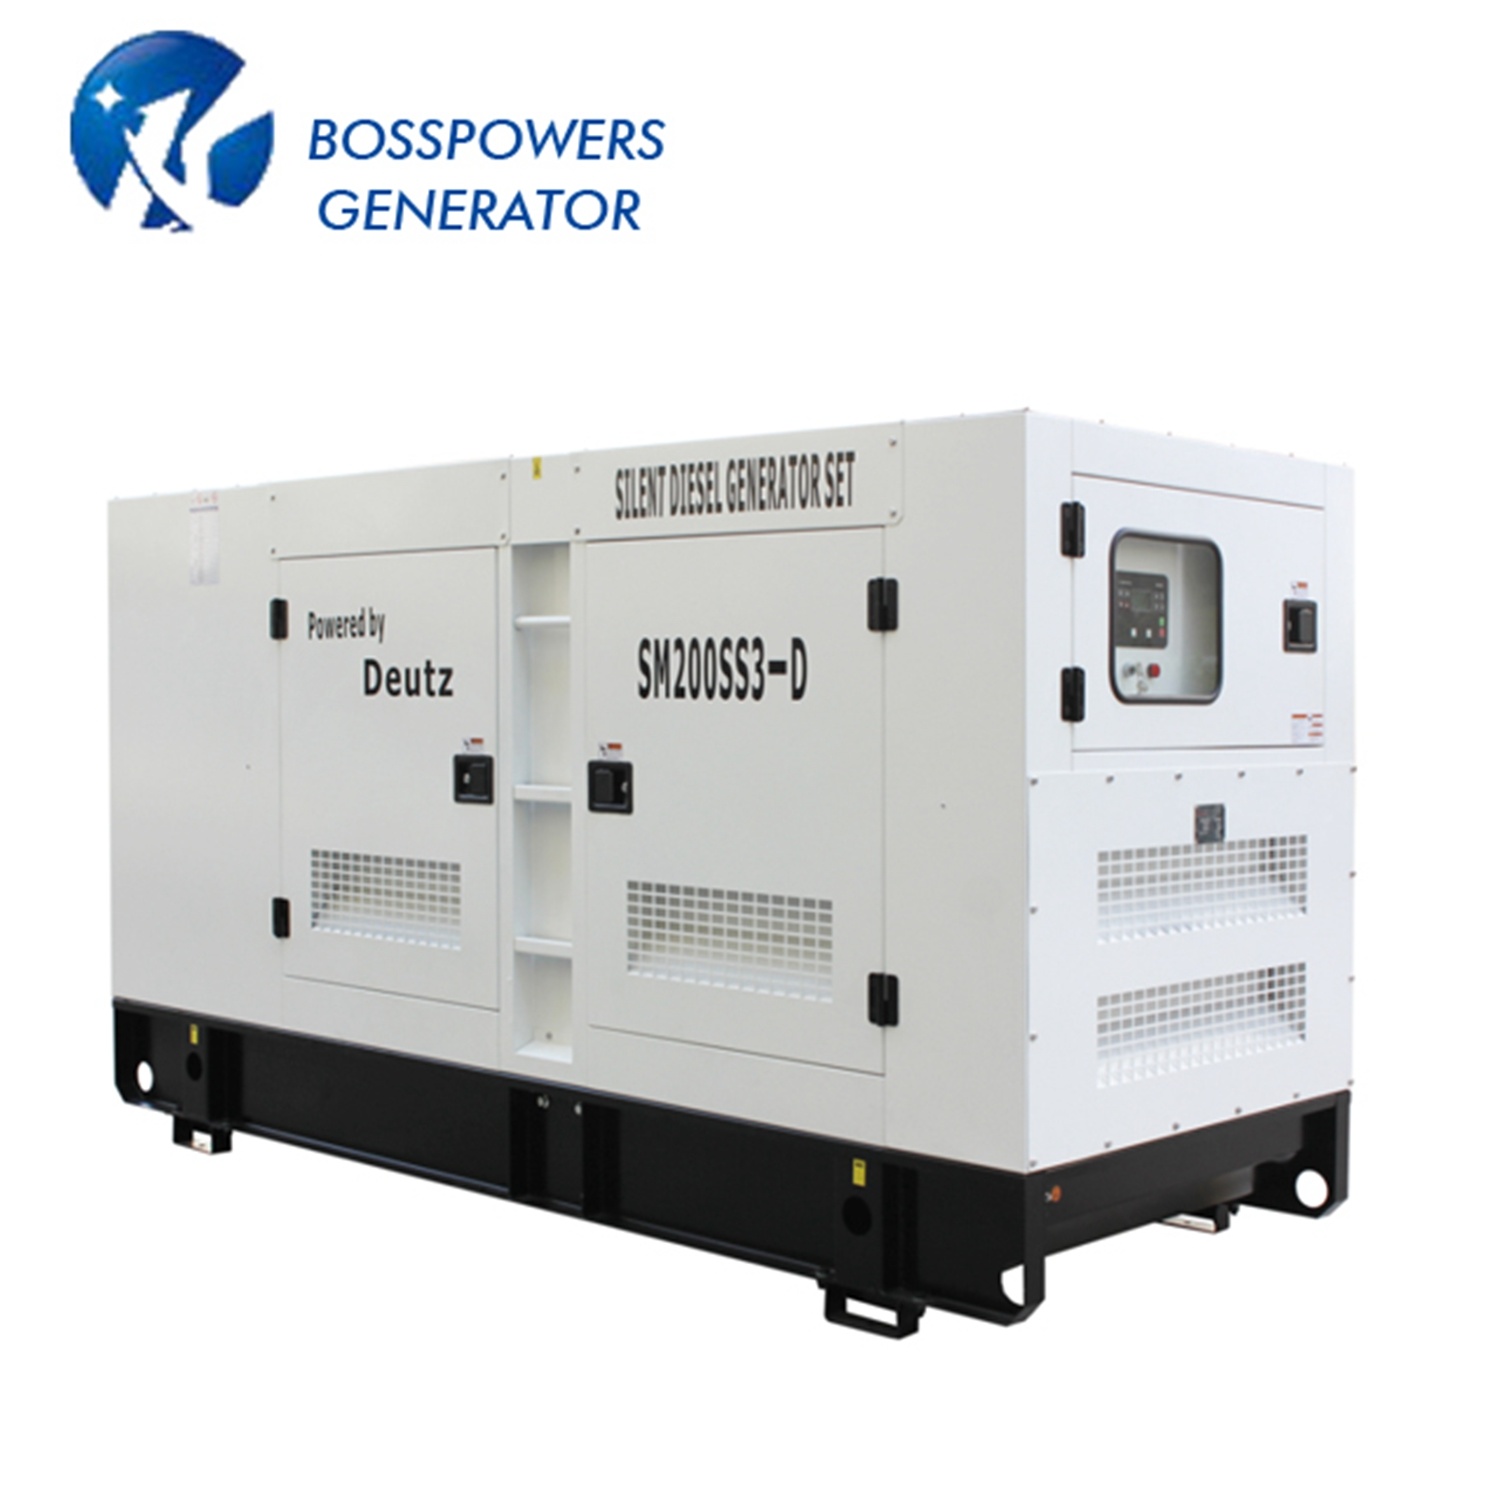 80kVA Diesel Generator Auto Start Electronic Governor Powered by 1104A-44tg2